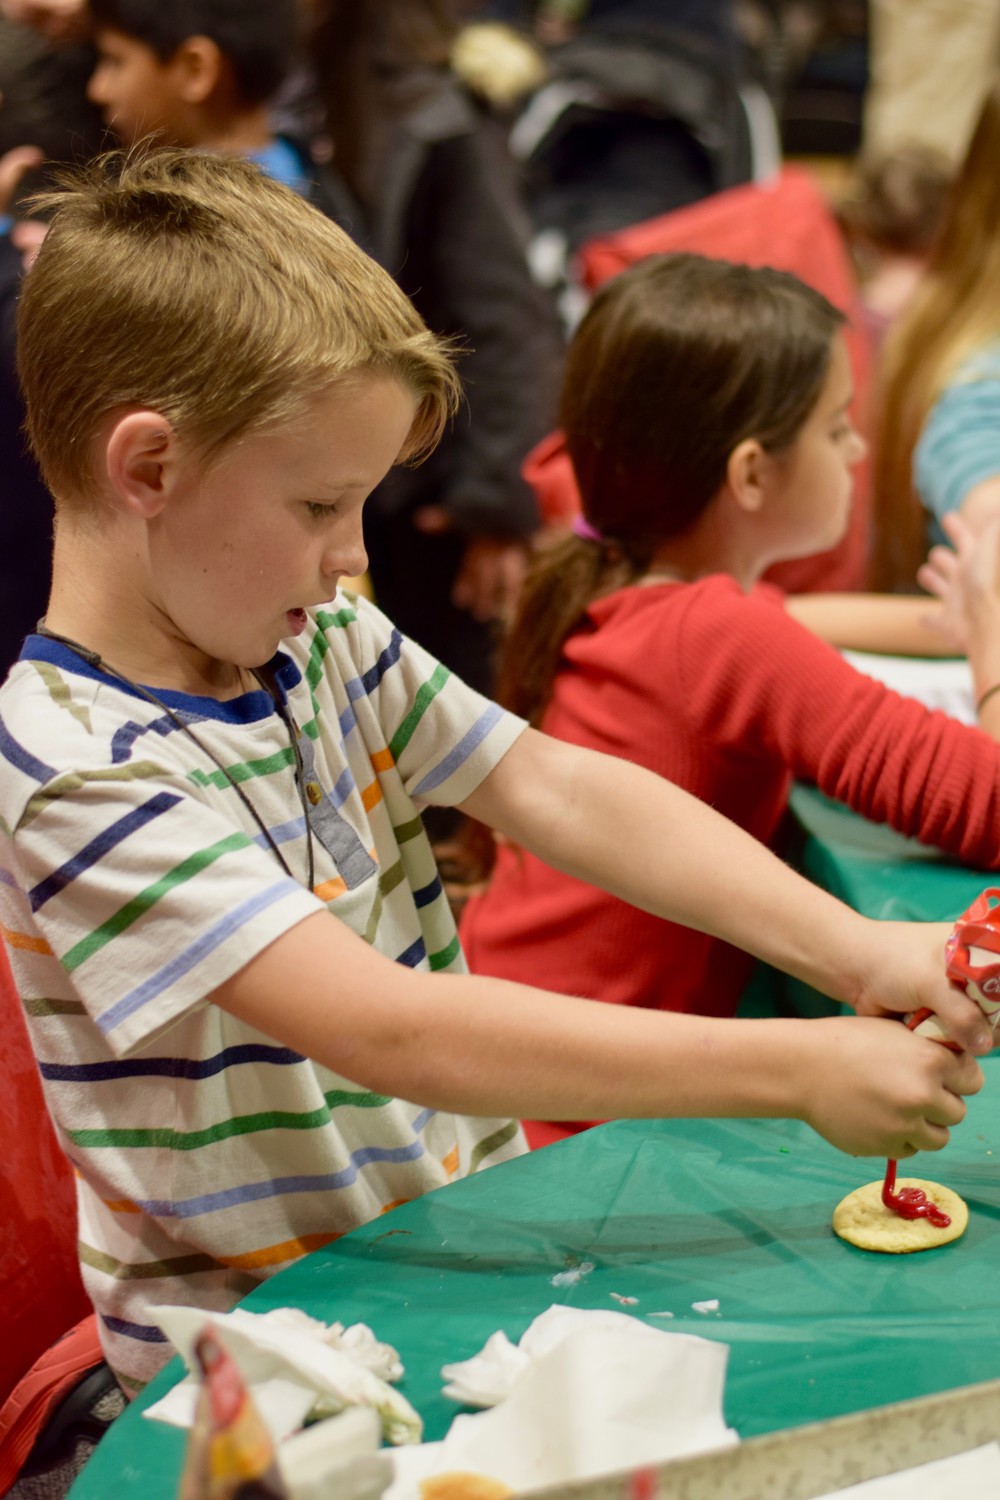 Children celebrate the holidays by decorating cookies at Shearwater’s Winter Festival.